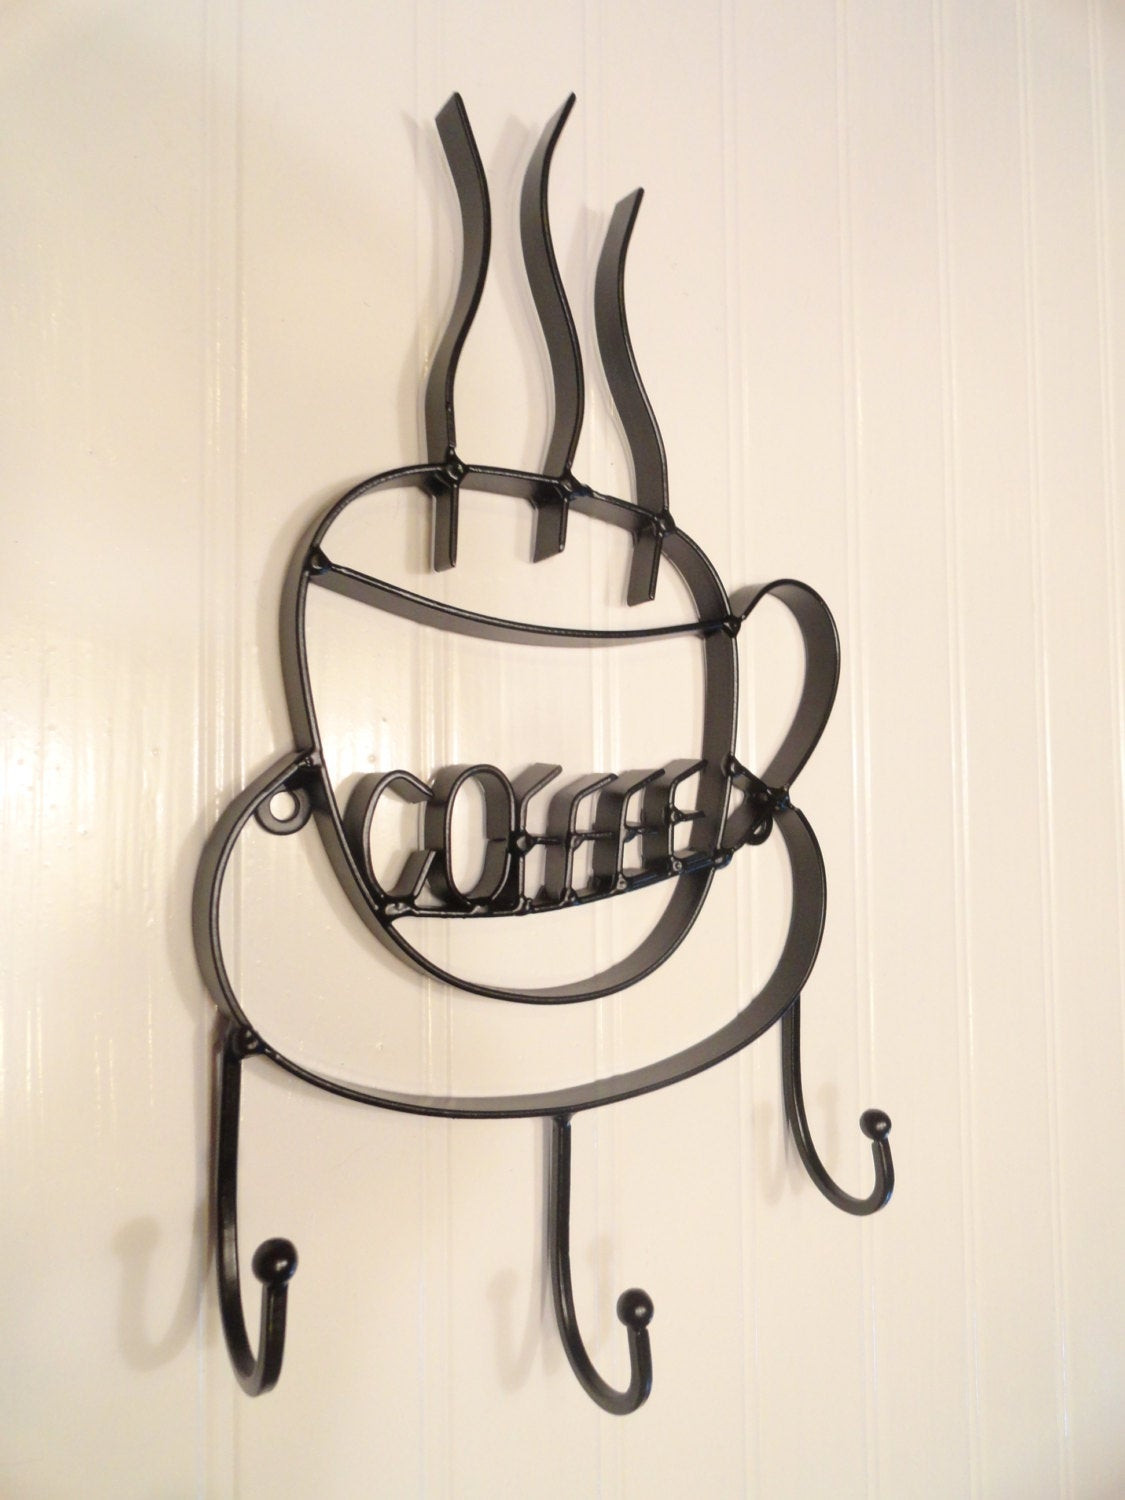 Coffee Wall Decor Kitchen
 Kitchen Wall Decor Black Coffee Cup Hook Hot Coffee Sign